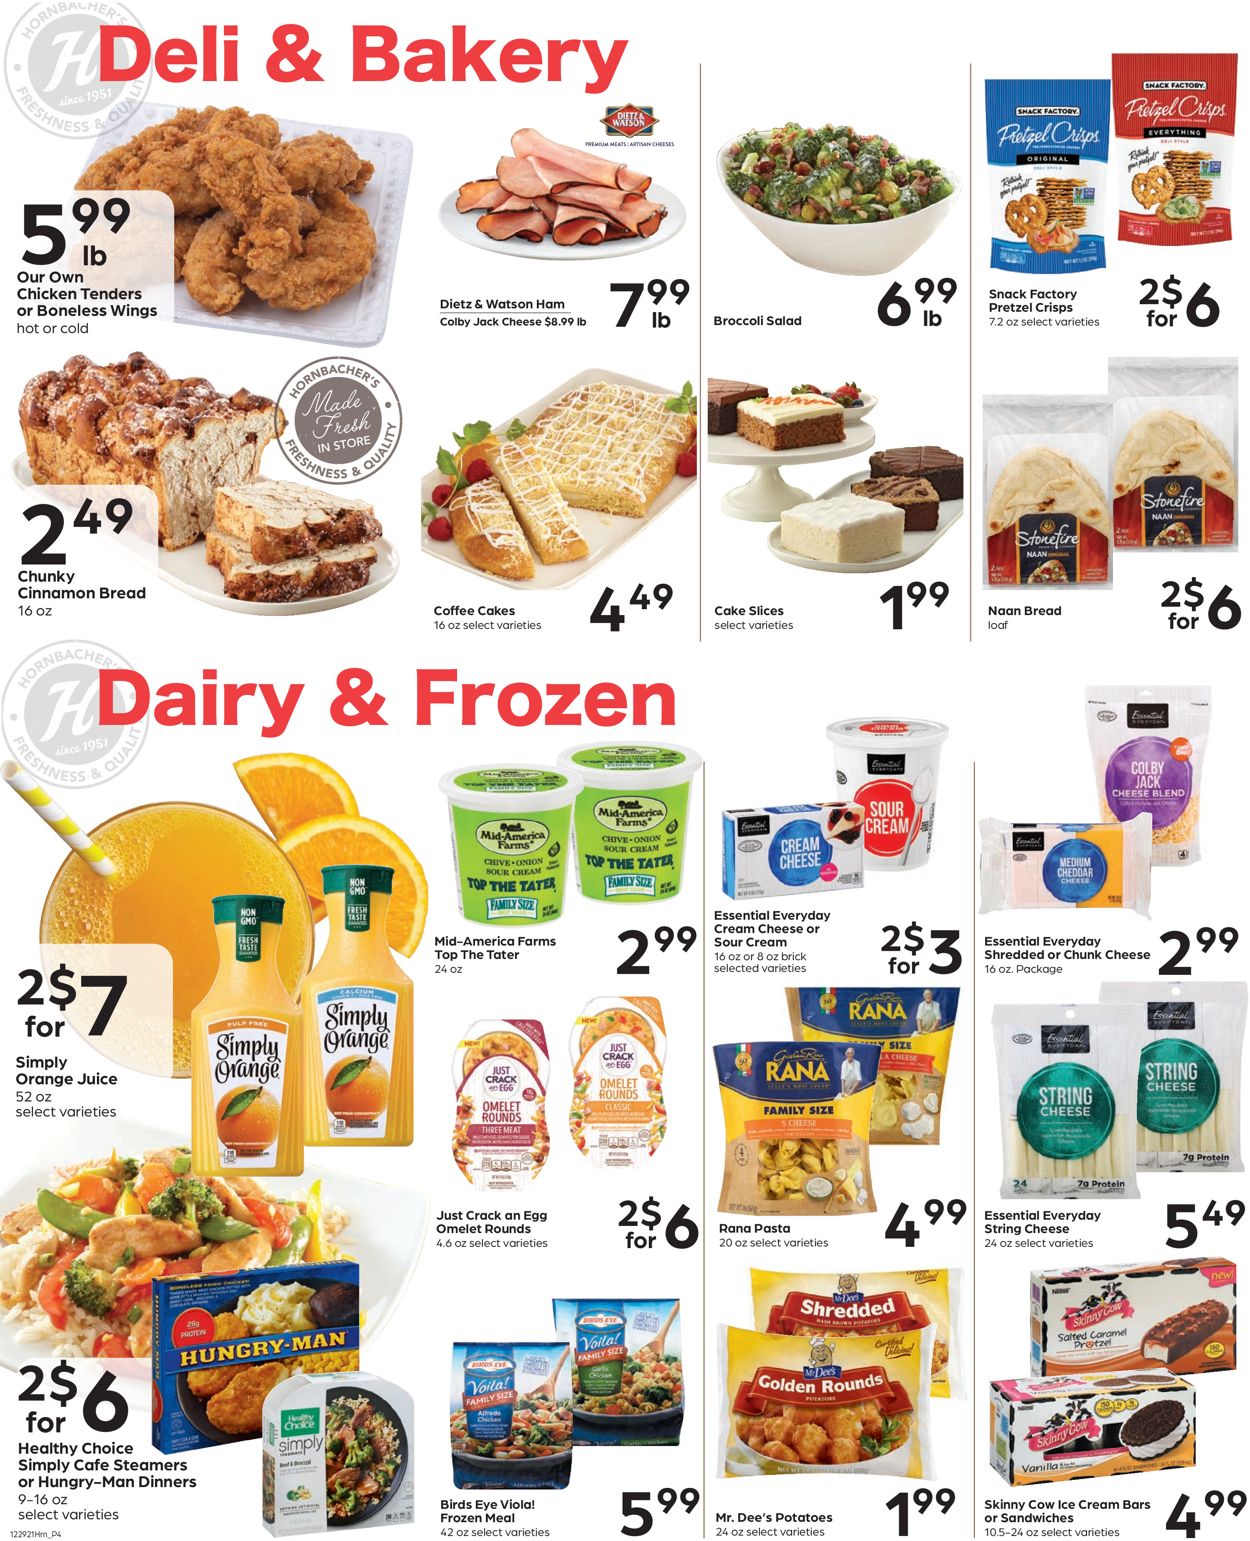 Hornbacher's Weekly Ad Circular - valid 12/29-01/04/2022 (Page 4)